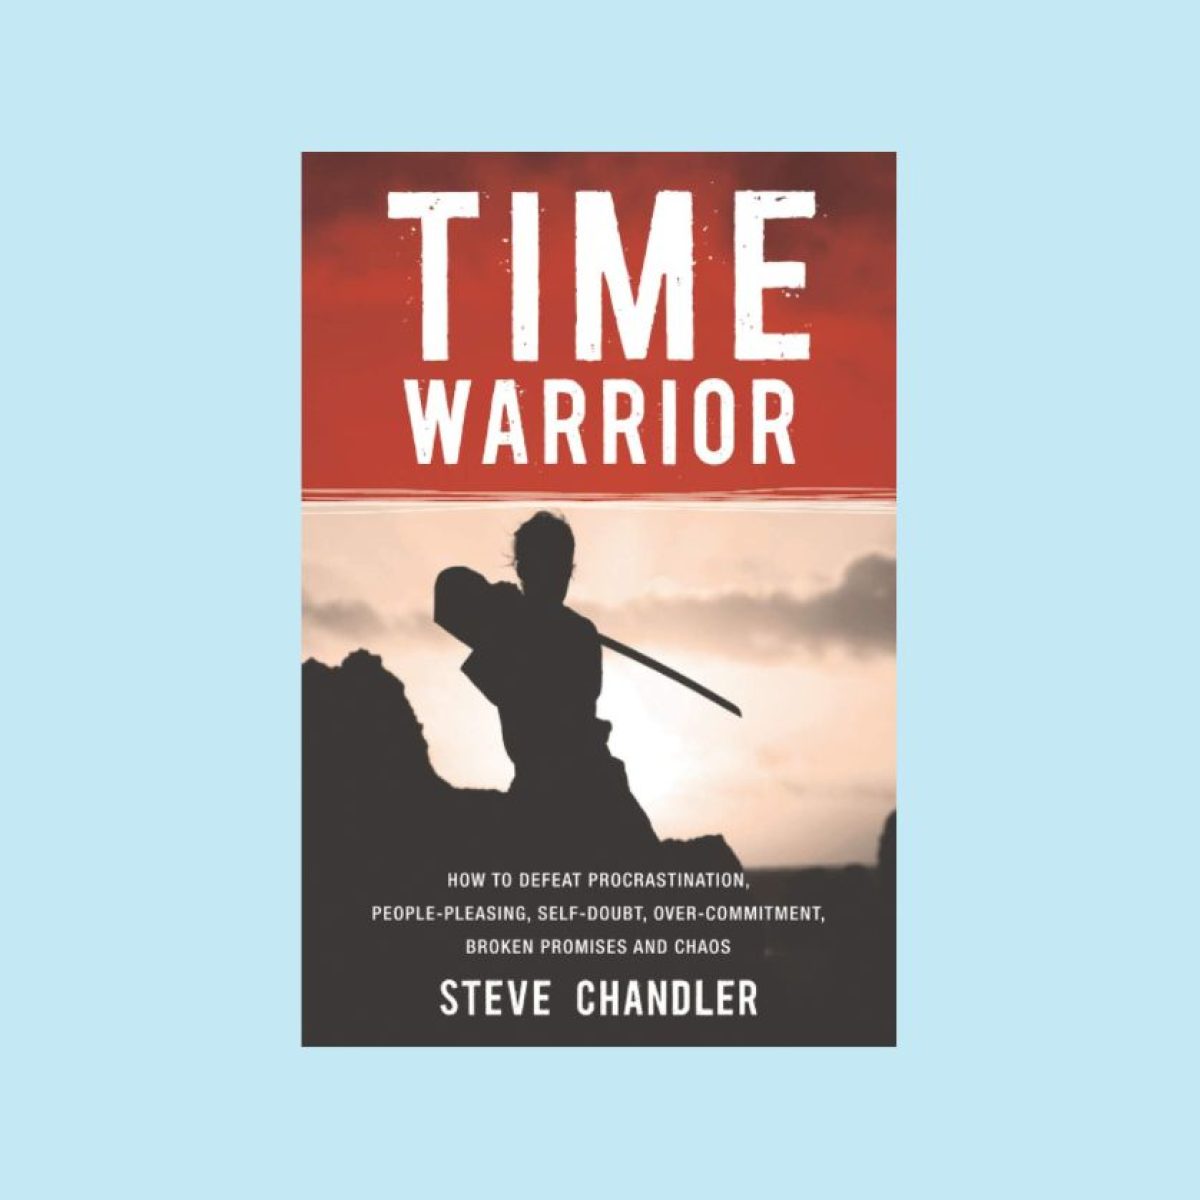 The cover of time warrior by steve chandler.